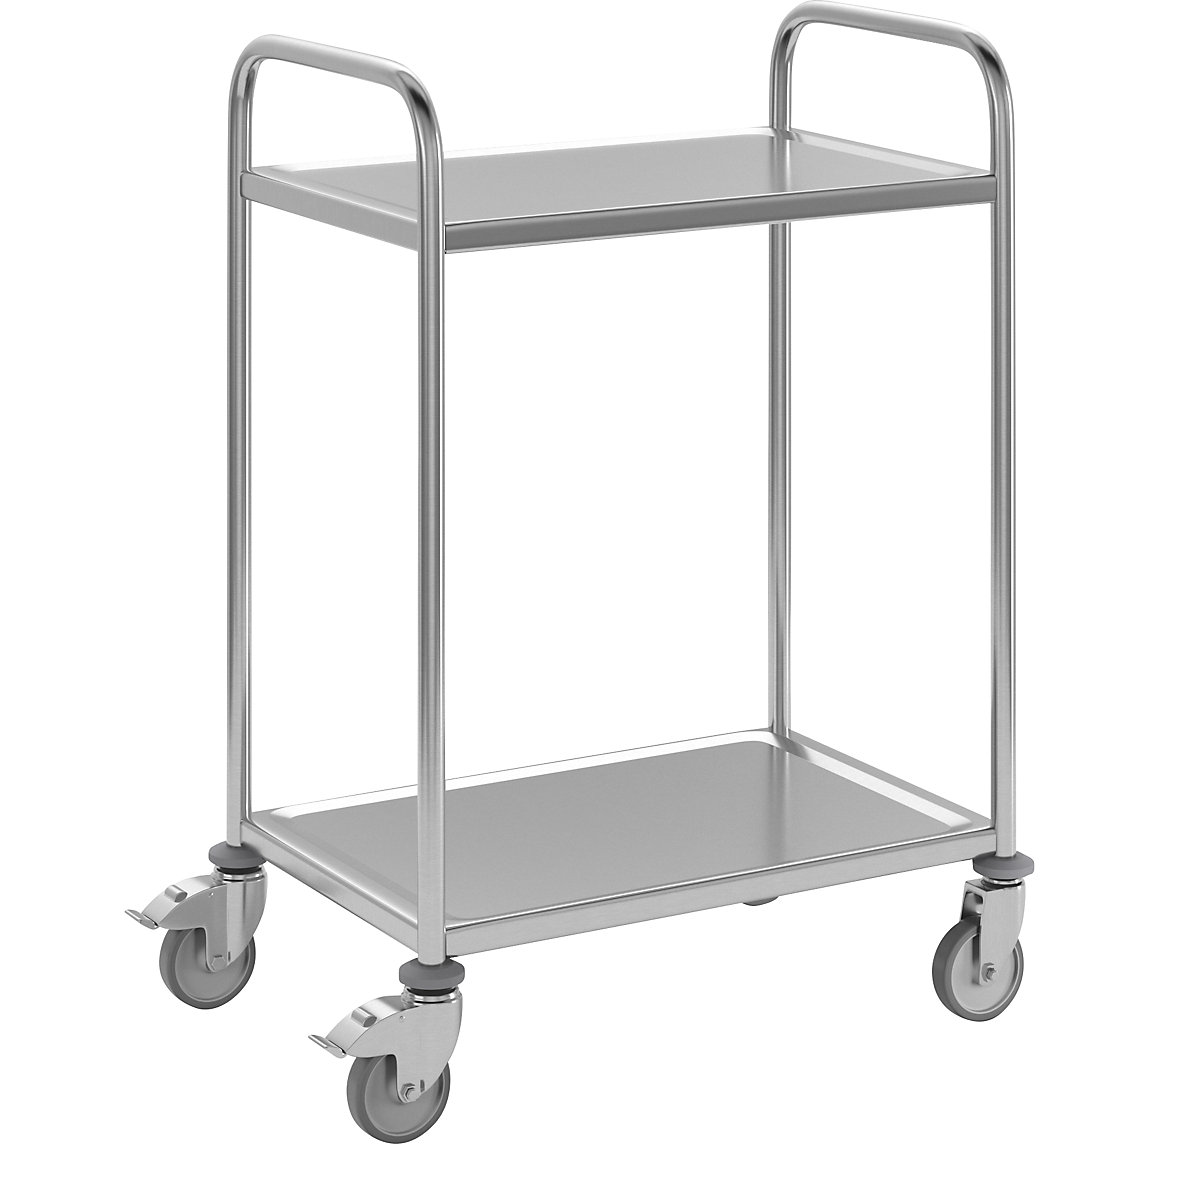 Stainless steel serving trolley, 2 shelves, zinc plated castor, rubber tyres, LxWxH 700 x 470 x 970 mm-3